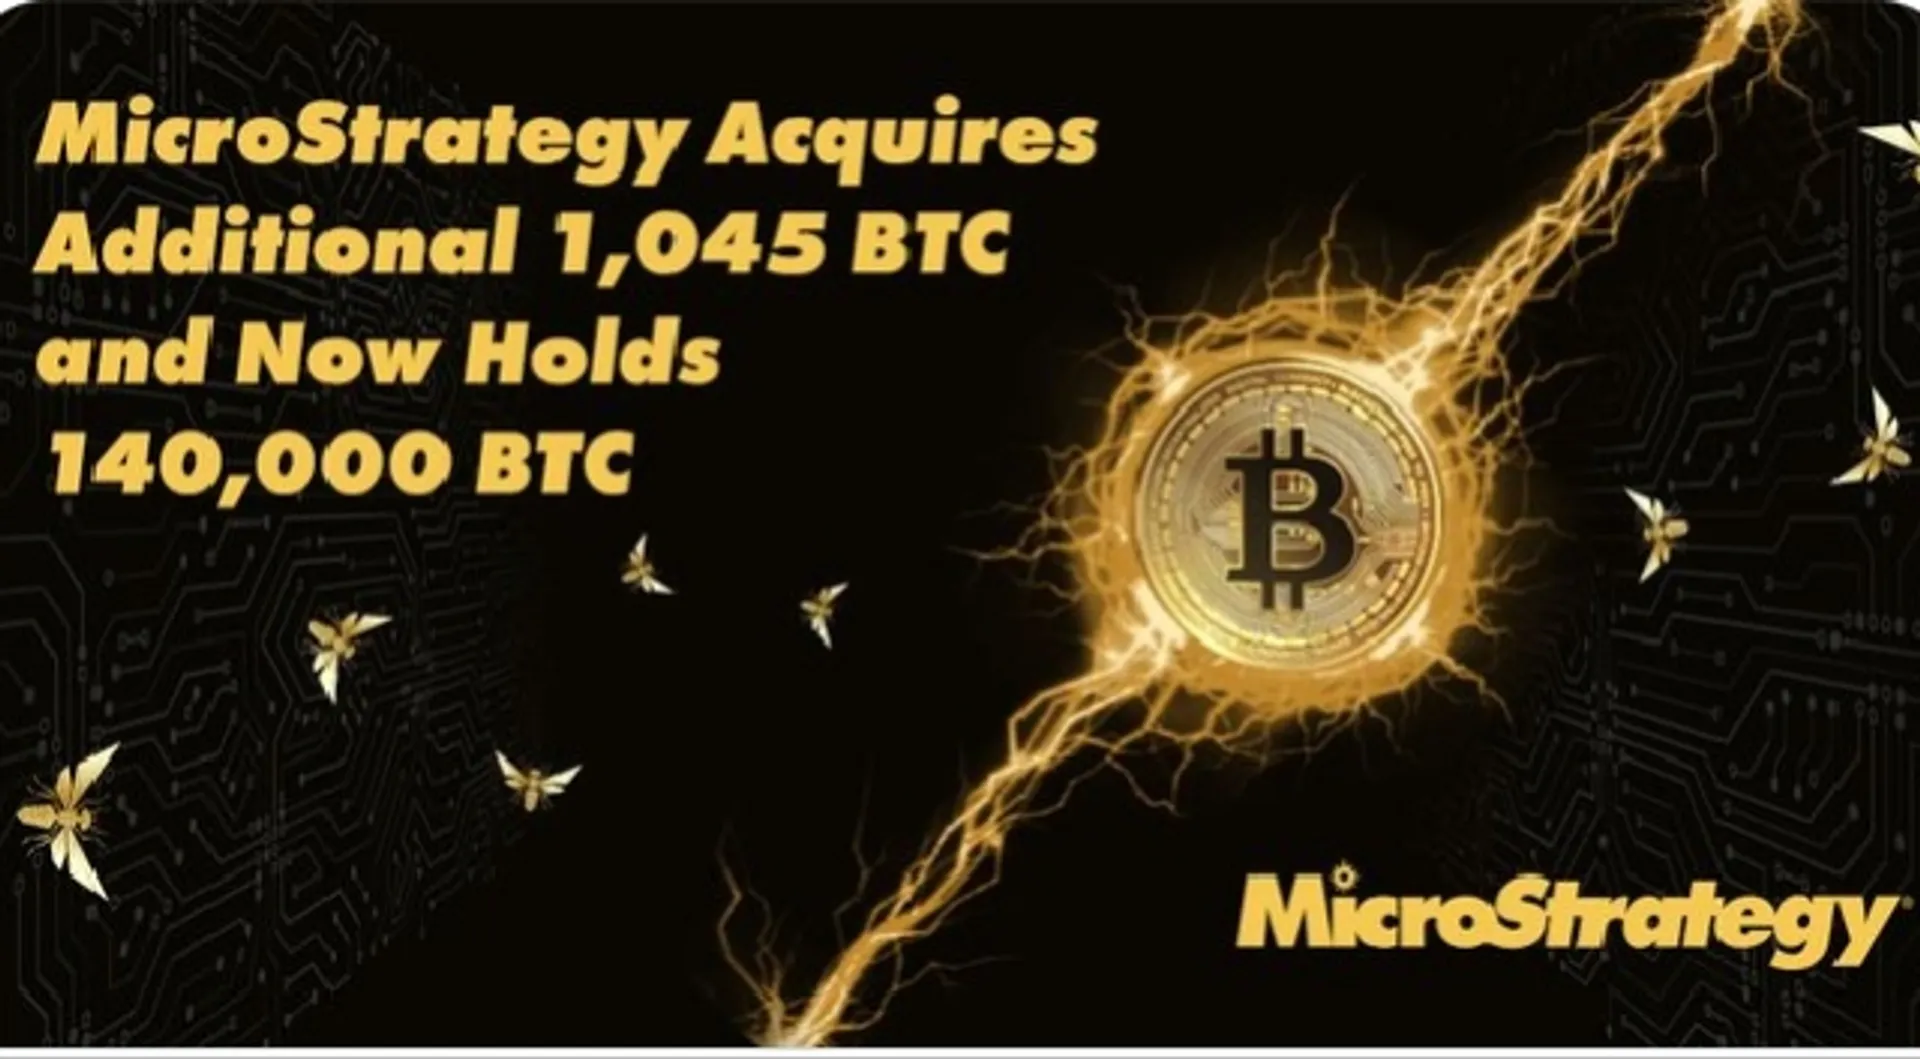 MicroStrategy has acquired an additional 1,045 #bitcoin for ~ $29.3M at an average price of $28,016 per bitcoin. As of 4/4/2023 @MicroStrategy holds 140,000 bitcoin acquired for ~$4.17 billion at an average price of $29,803 per bitcoin. $MSTR

https://www.microstrategy.com/en/investor-relations/financial-documents/microstrategy-acquires-additional-1045-btc-and-now-holds-140000-btc_4-5-2023